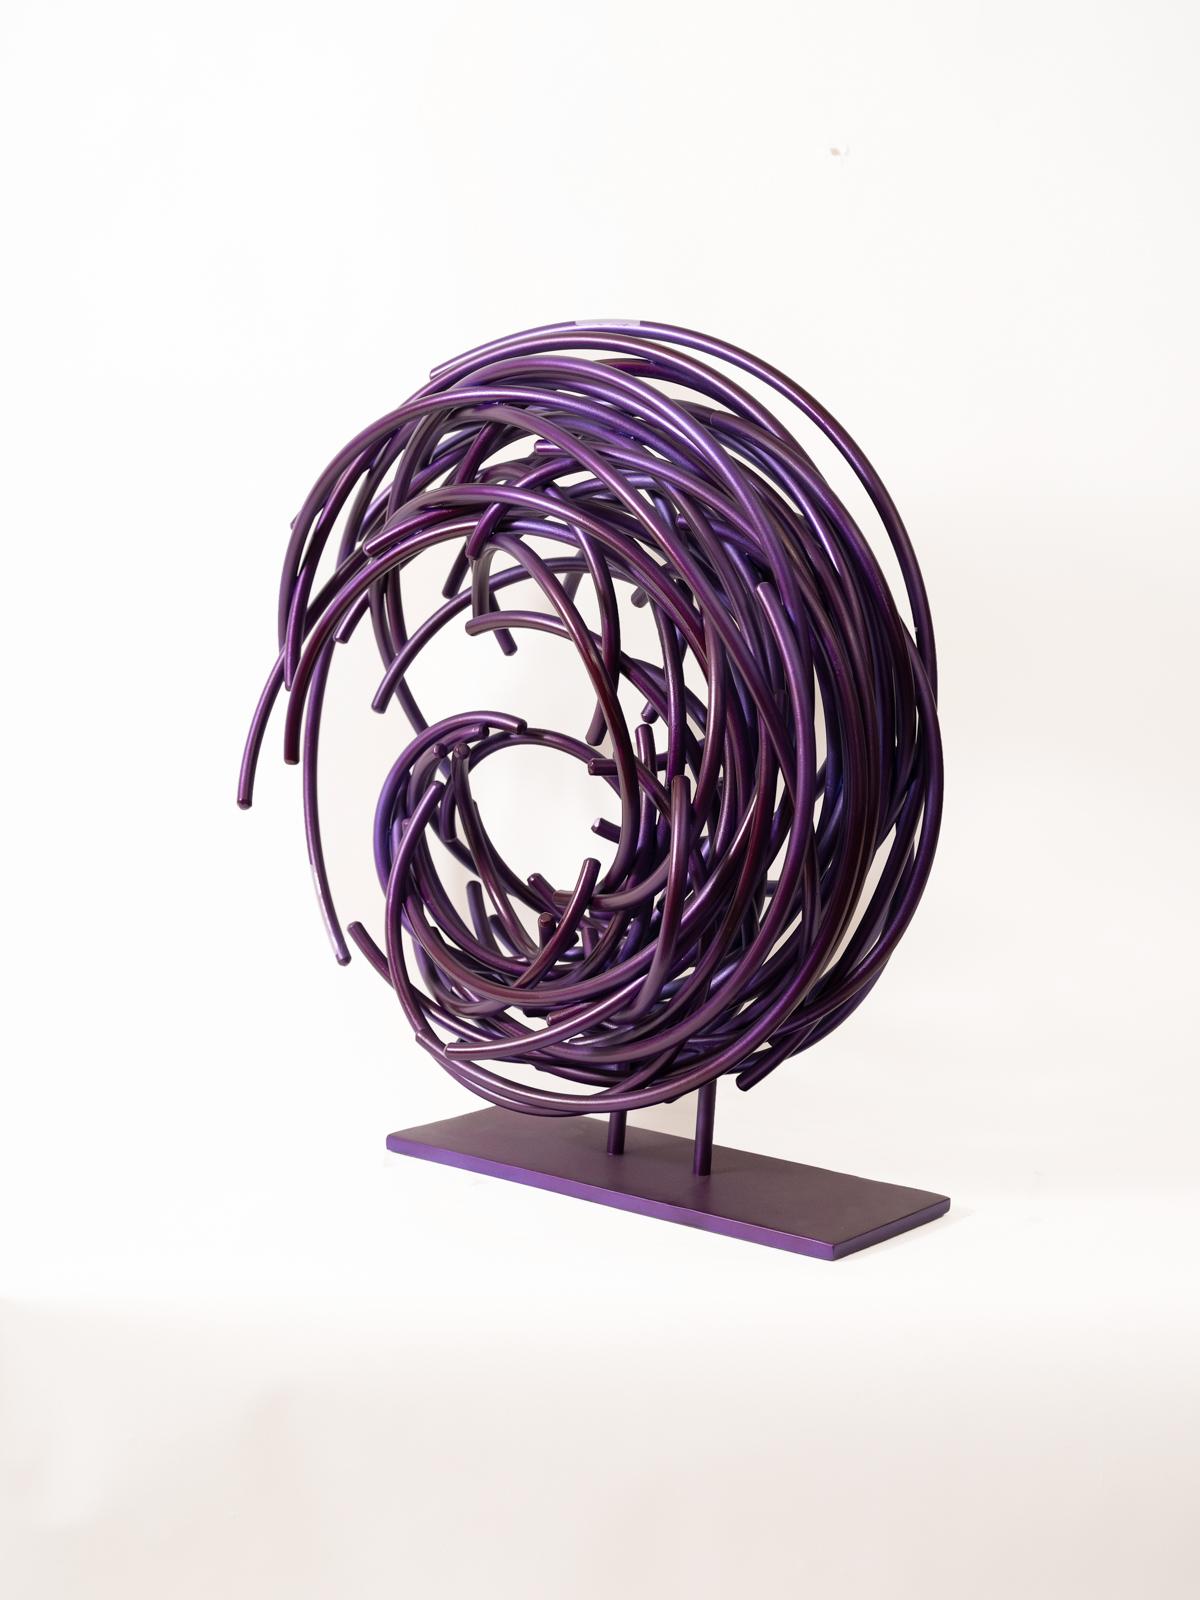 Maelstrom Series No 5 - layered, intersecting, forged aluminum sculpture For Sale 4